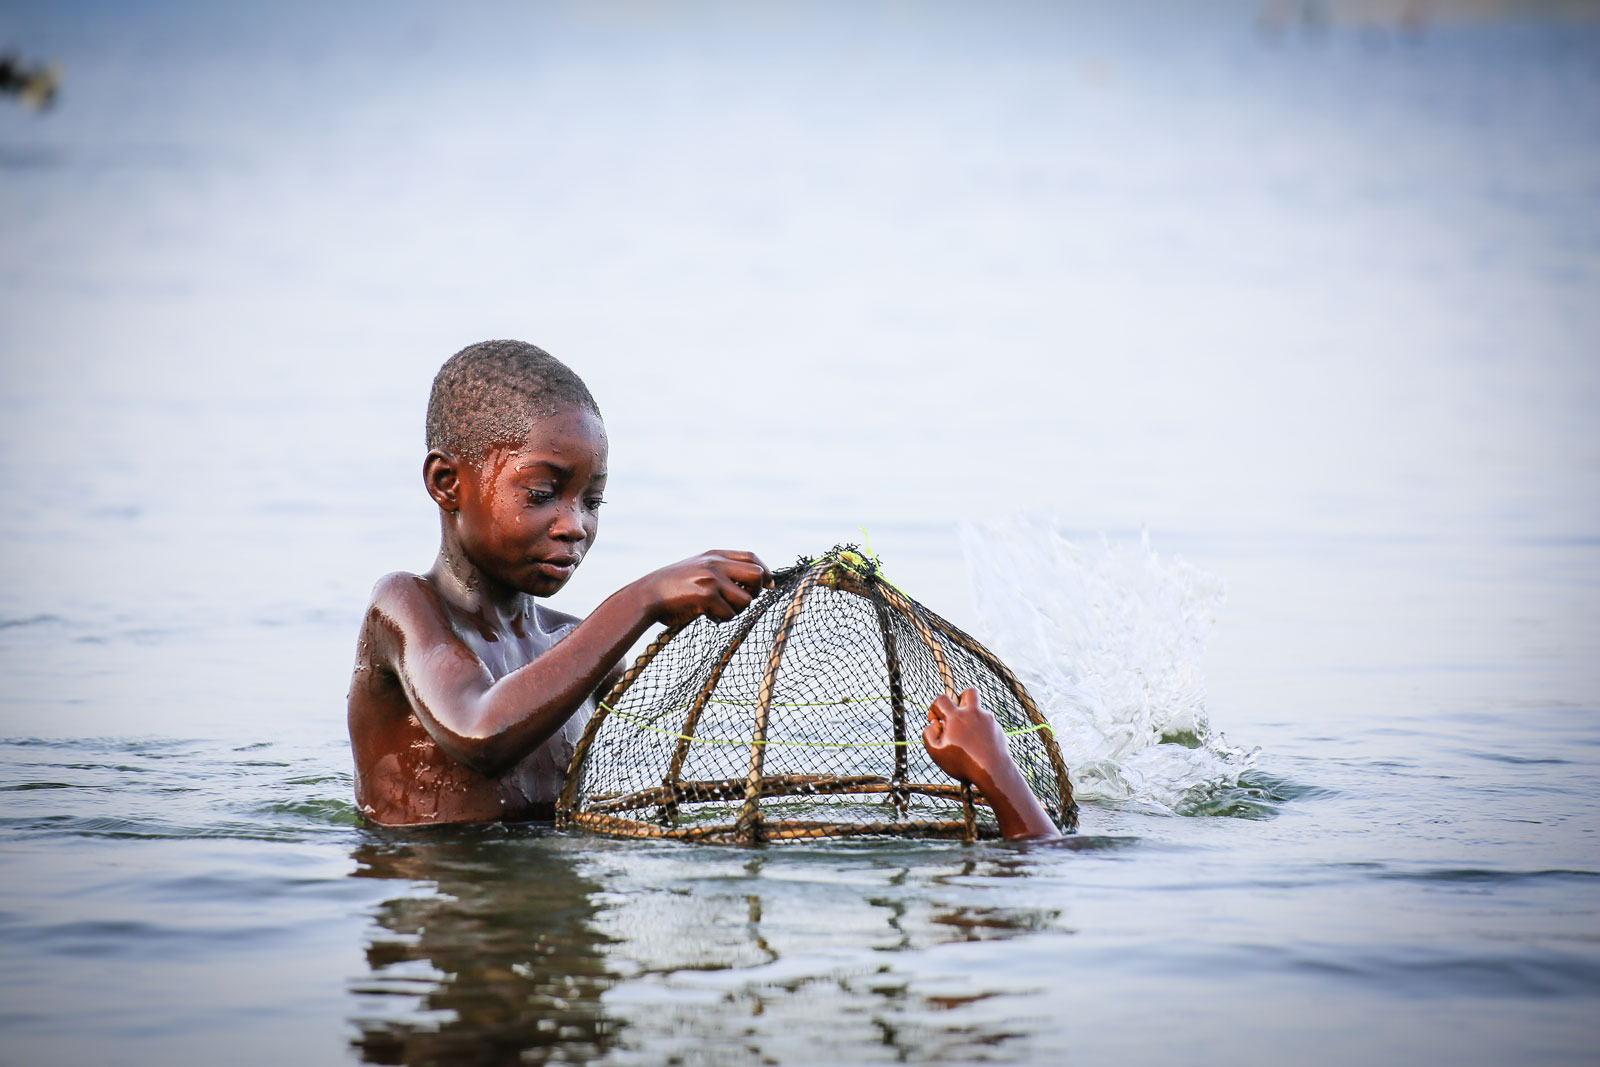 slavery child powerful children lake freedom volta capture ghana journey compassion labor human working trafficking water parents embrace fishing